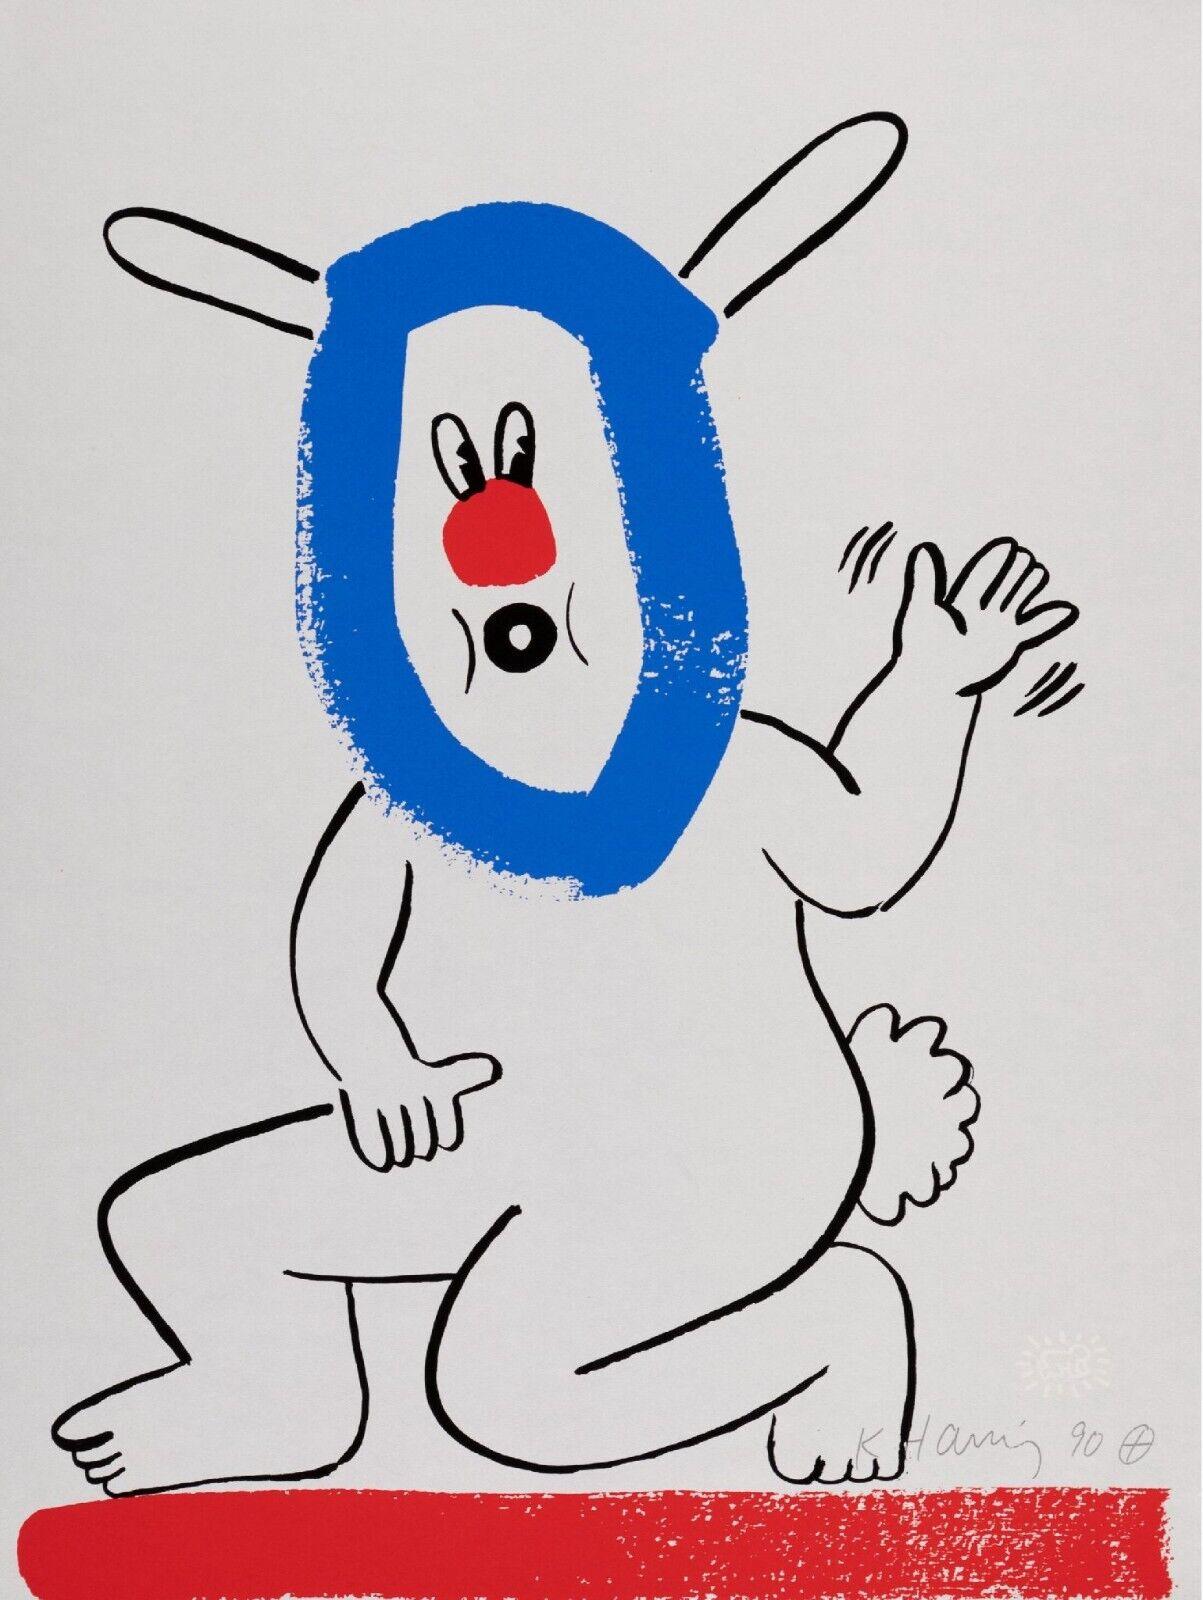 Artist: Keith Haring
Title: Untitled  (Story of Red and Blue)
Edition: Numbered From the limited edition of 90
Medium: Original serigraph in colors paper
Year: 1989-1990
Signature: Signed in plate by Haring, signed in pencil by Julian Gruen, the